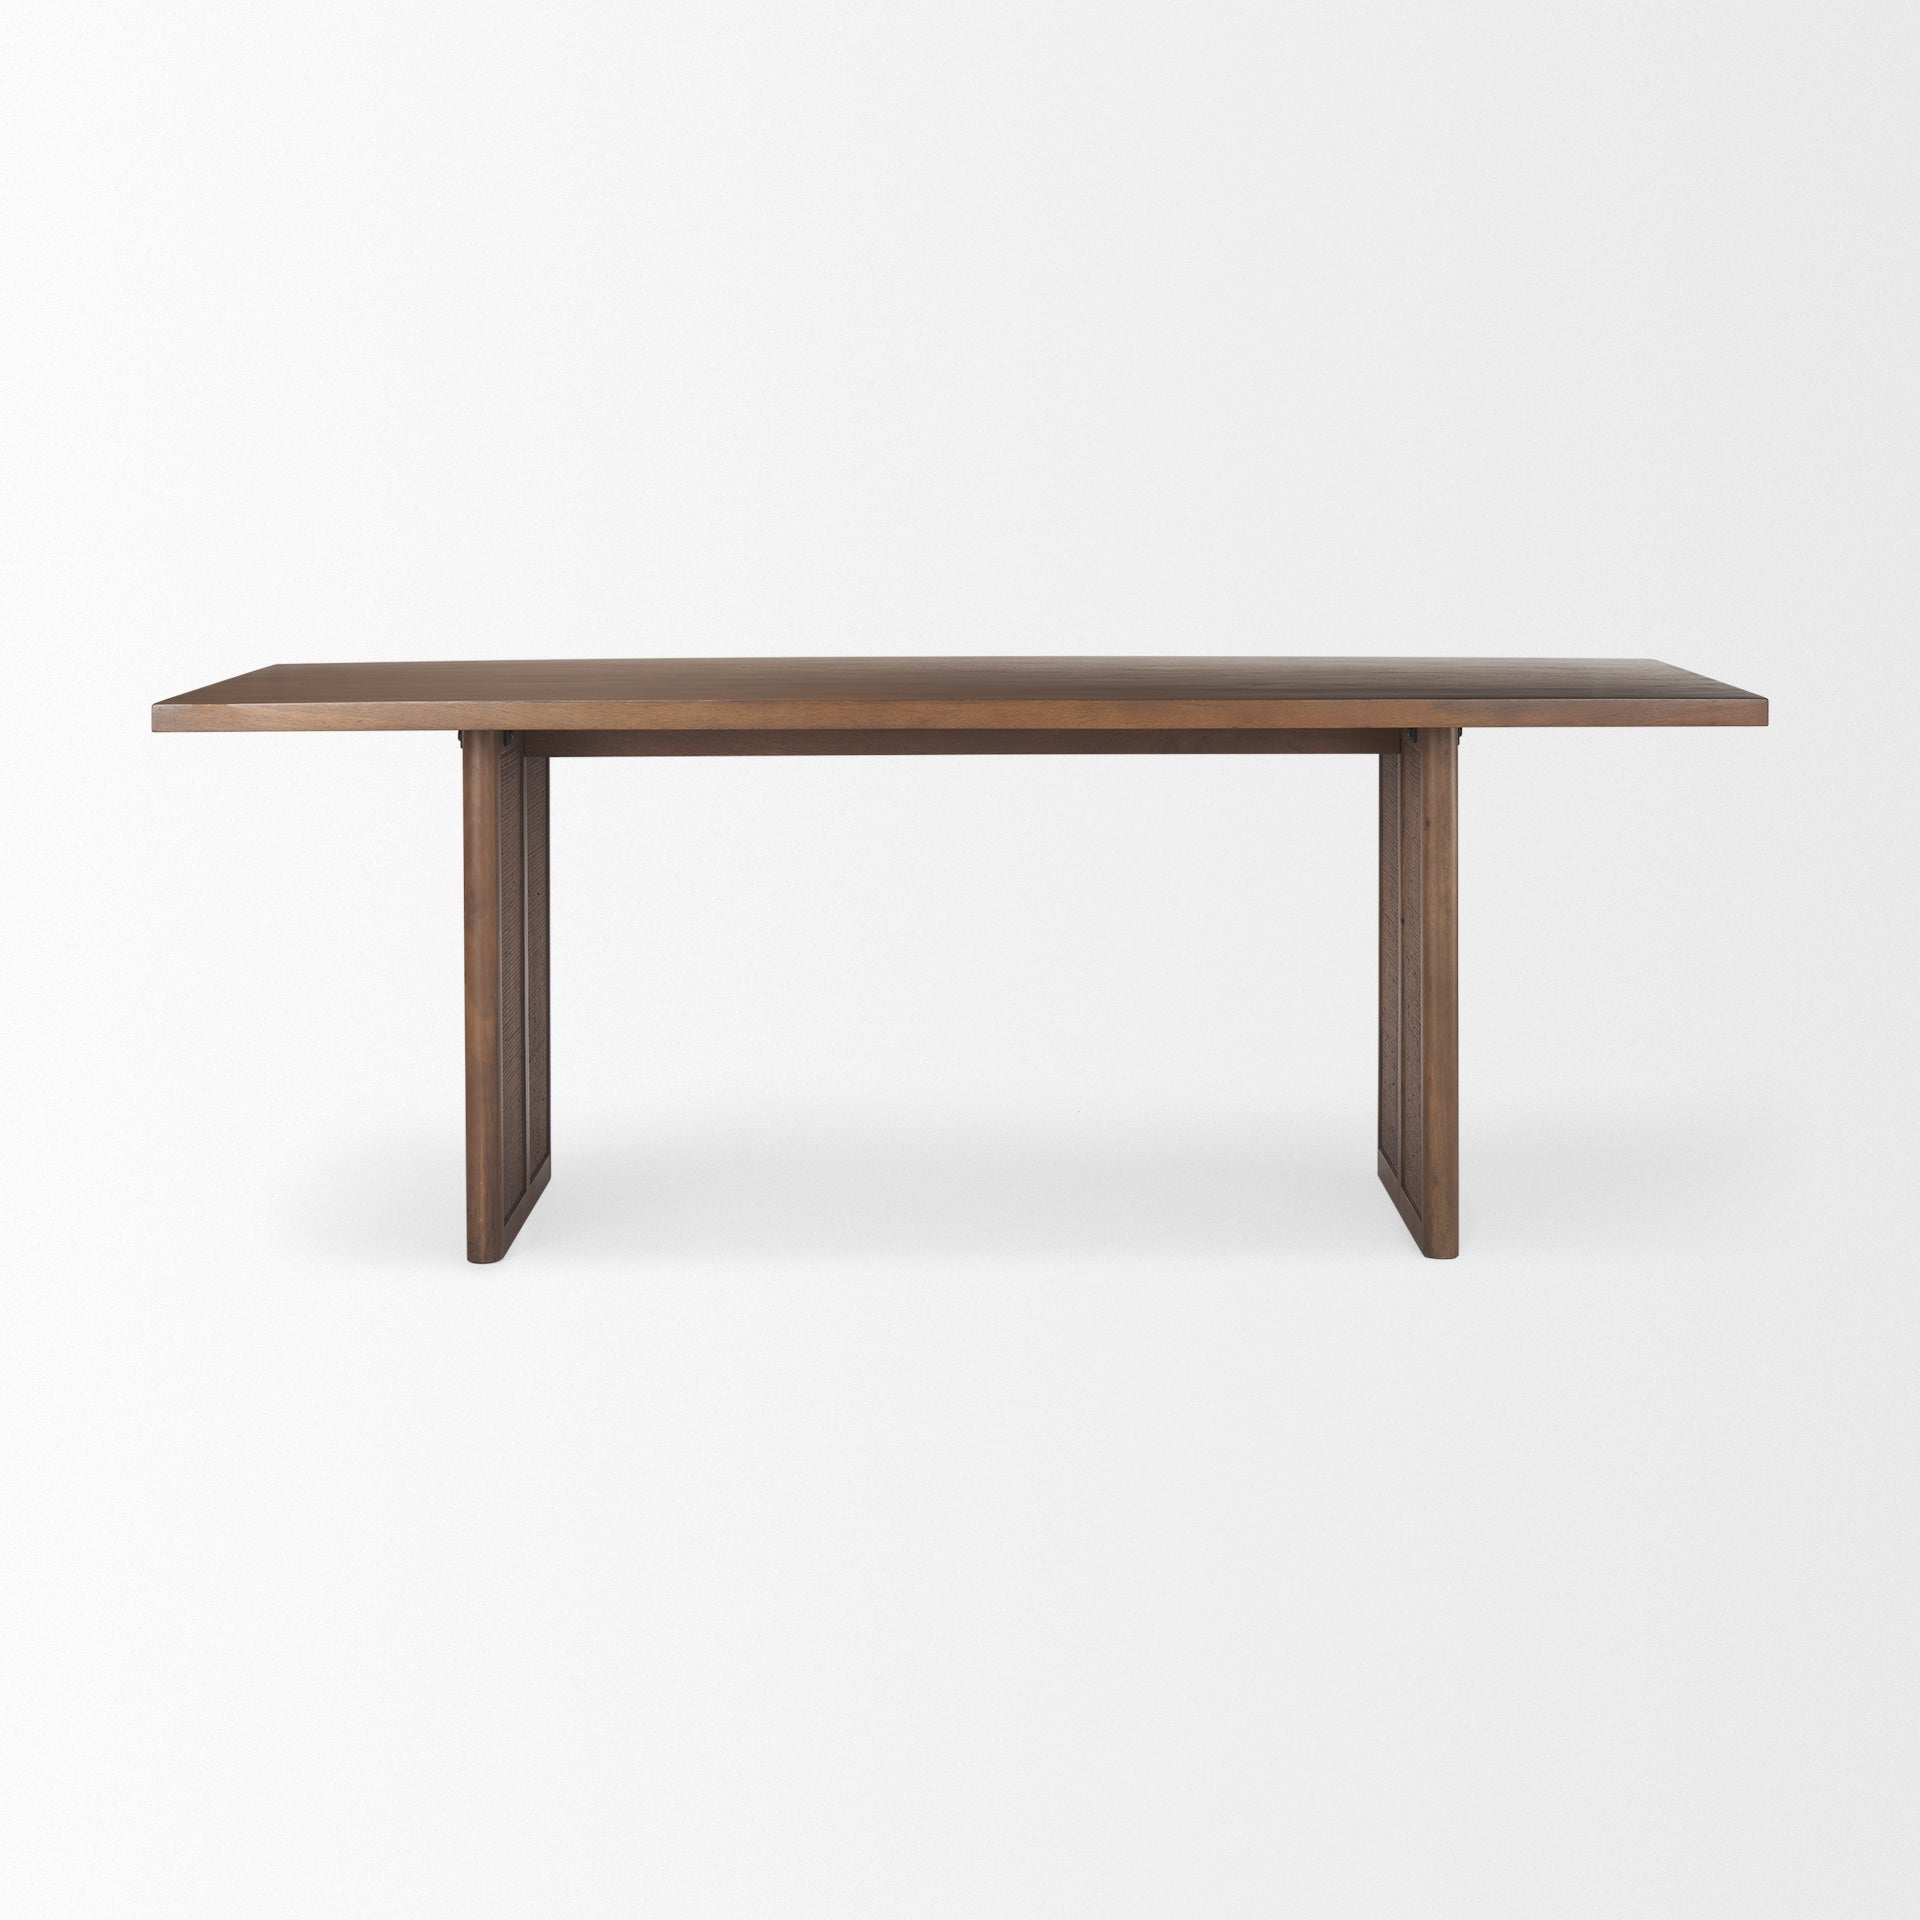 GRIER DINING TABLE - MEDIUM BROWN